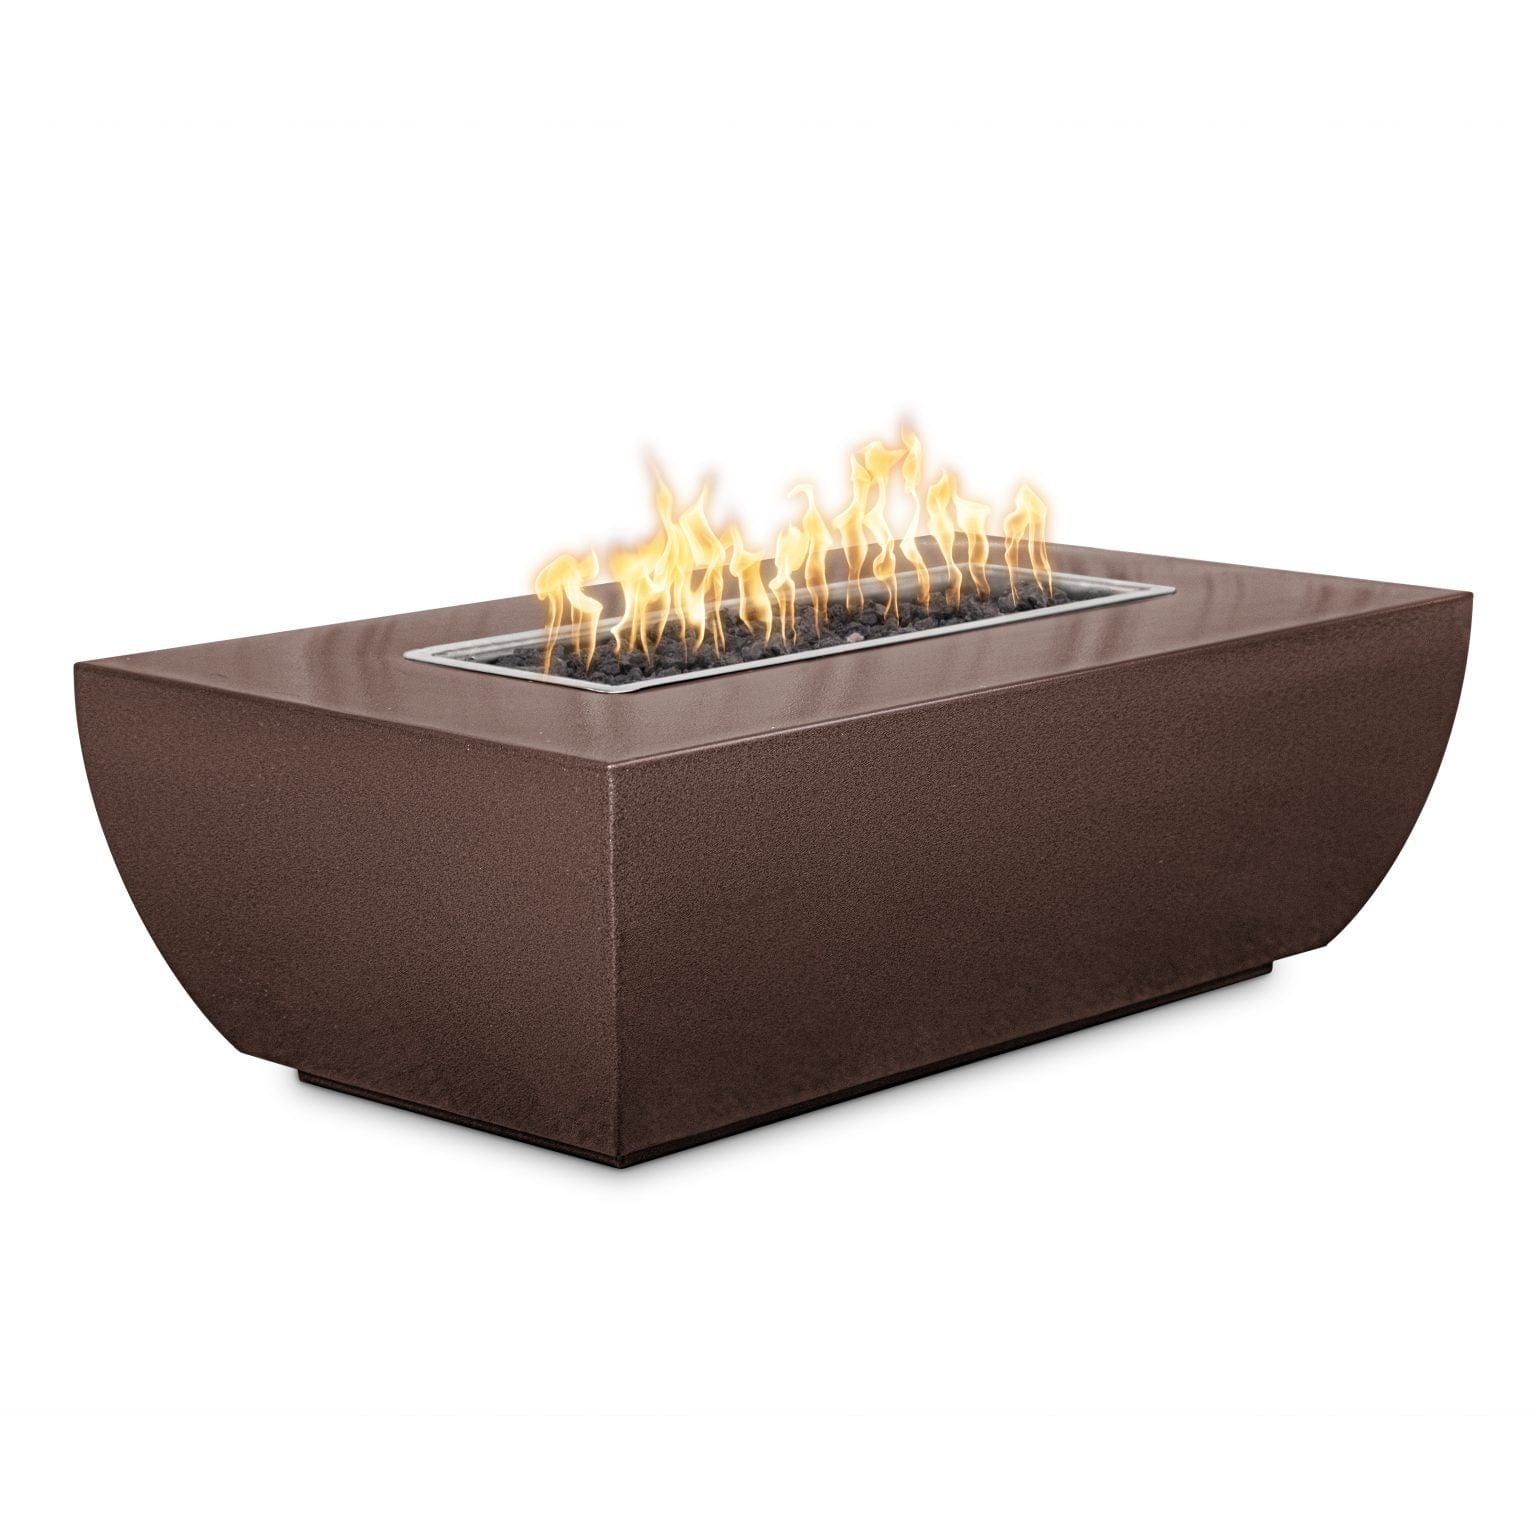 The Outdoor Plus Fire Pit 48" x 28" / Match Lit The Outdoor Plus Avalon 24" Tall Linear Fire Pit | Copper OPT-AVLCPR4824